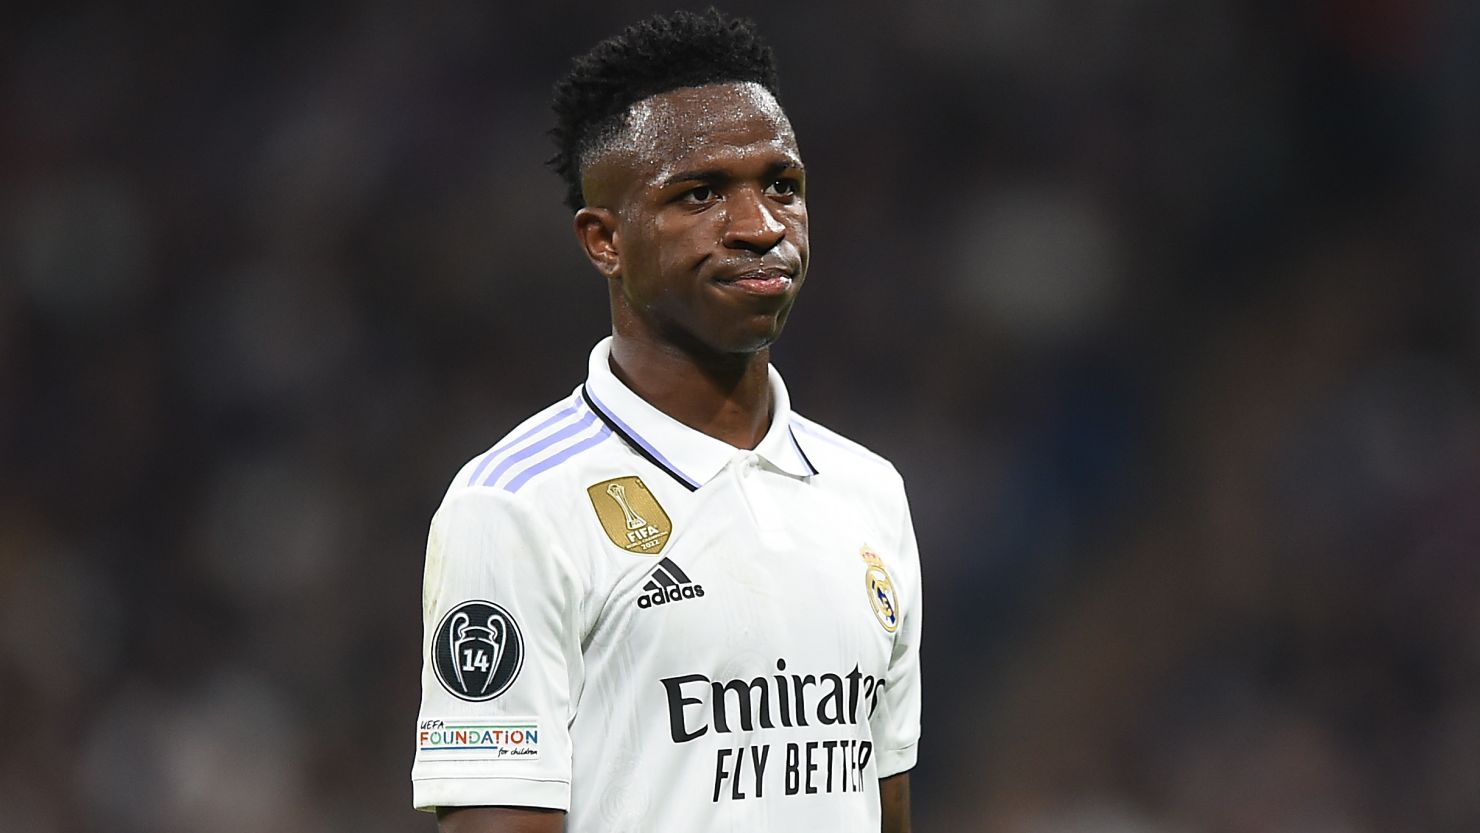 Vinícius Jr. has been the victim of racist abuse on numerous occasions this season.